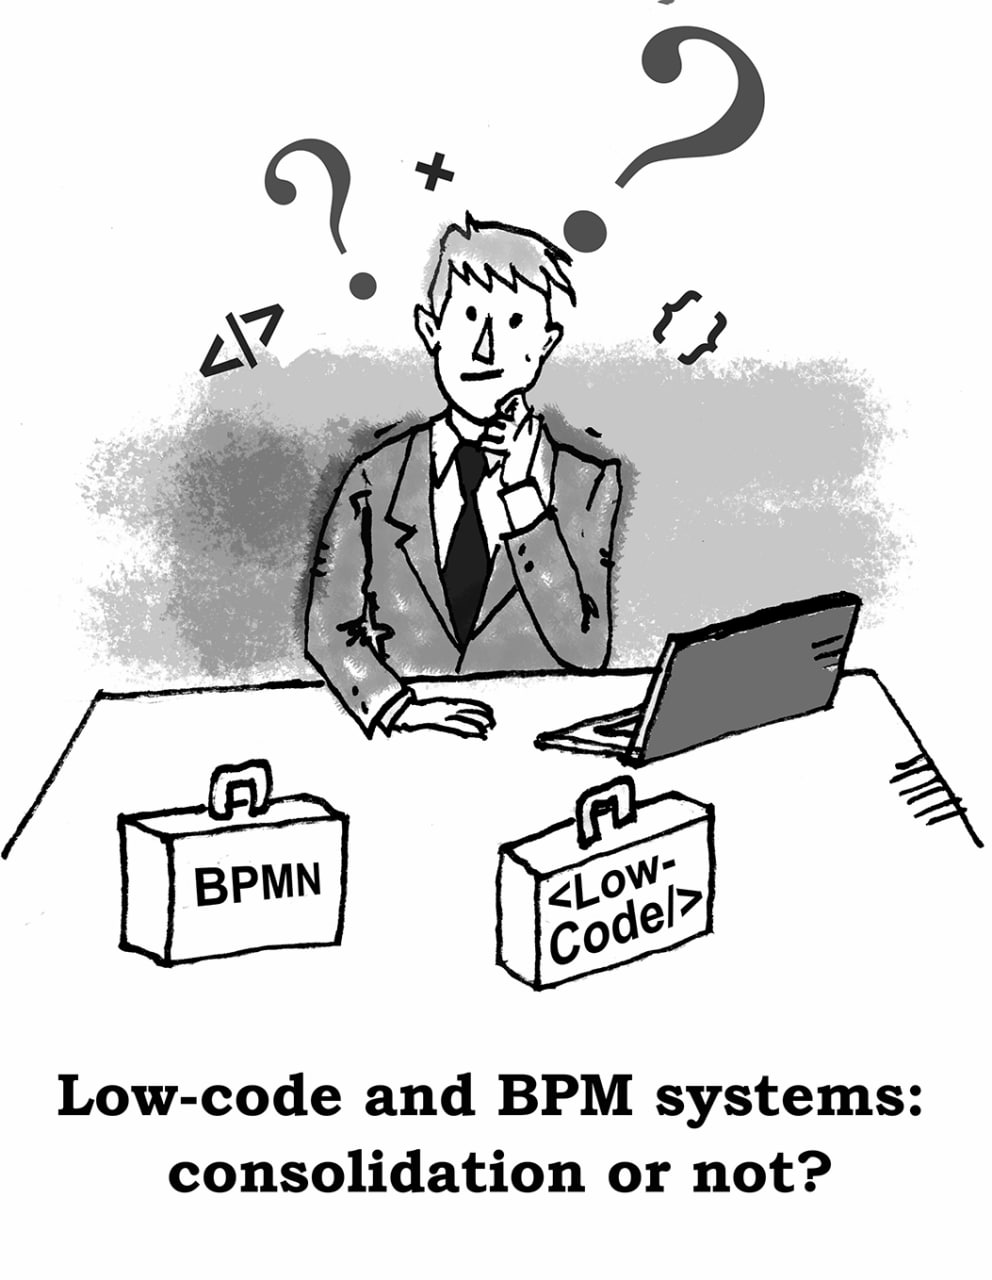 Low-code and BPM systems: consolidation or not?
